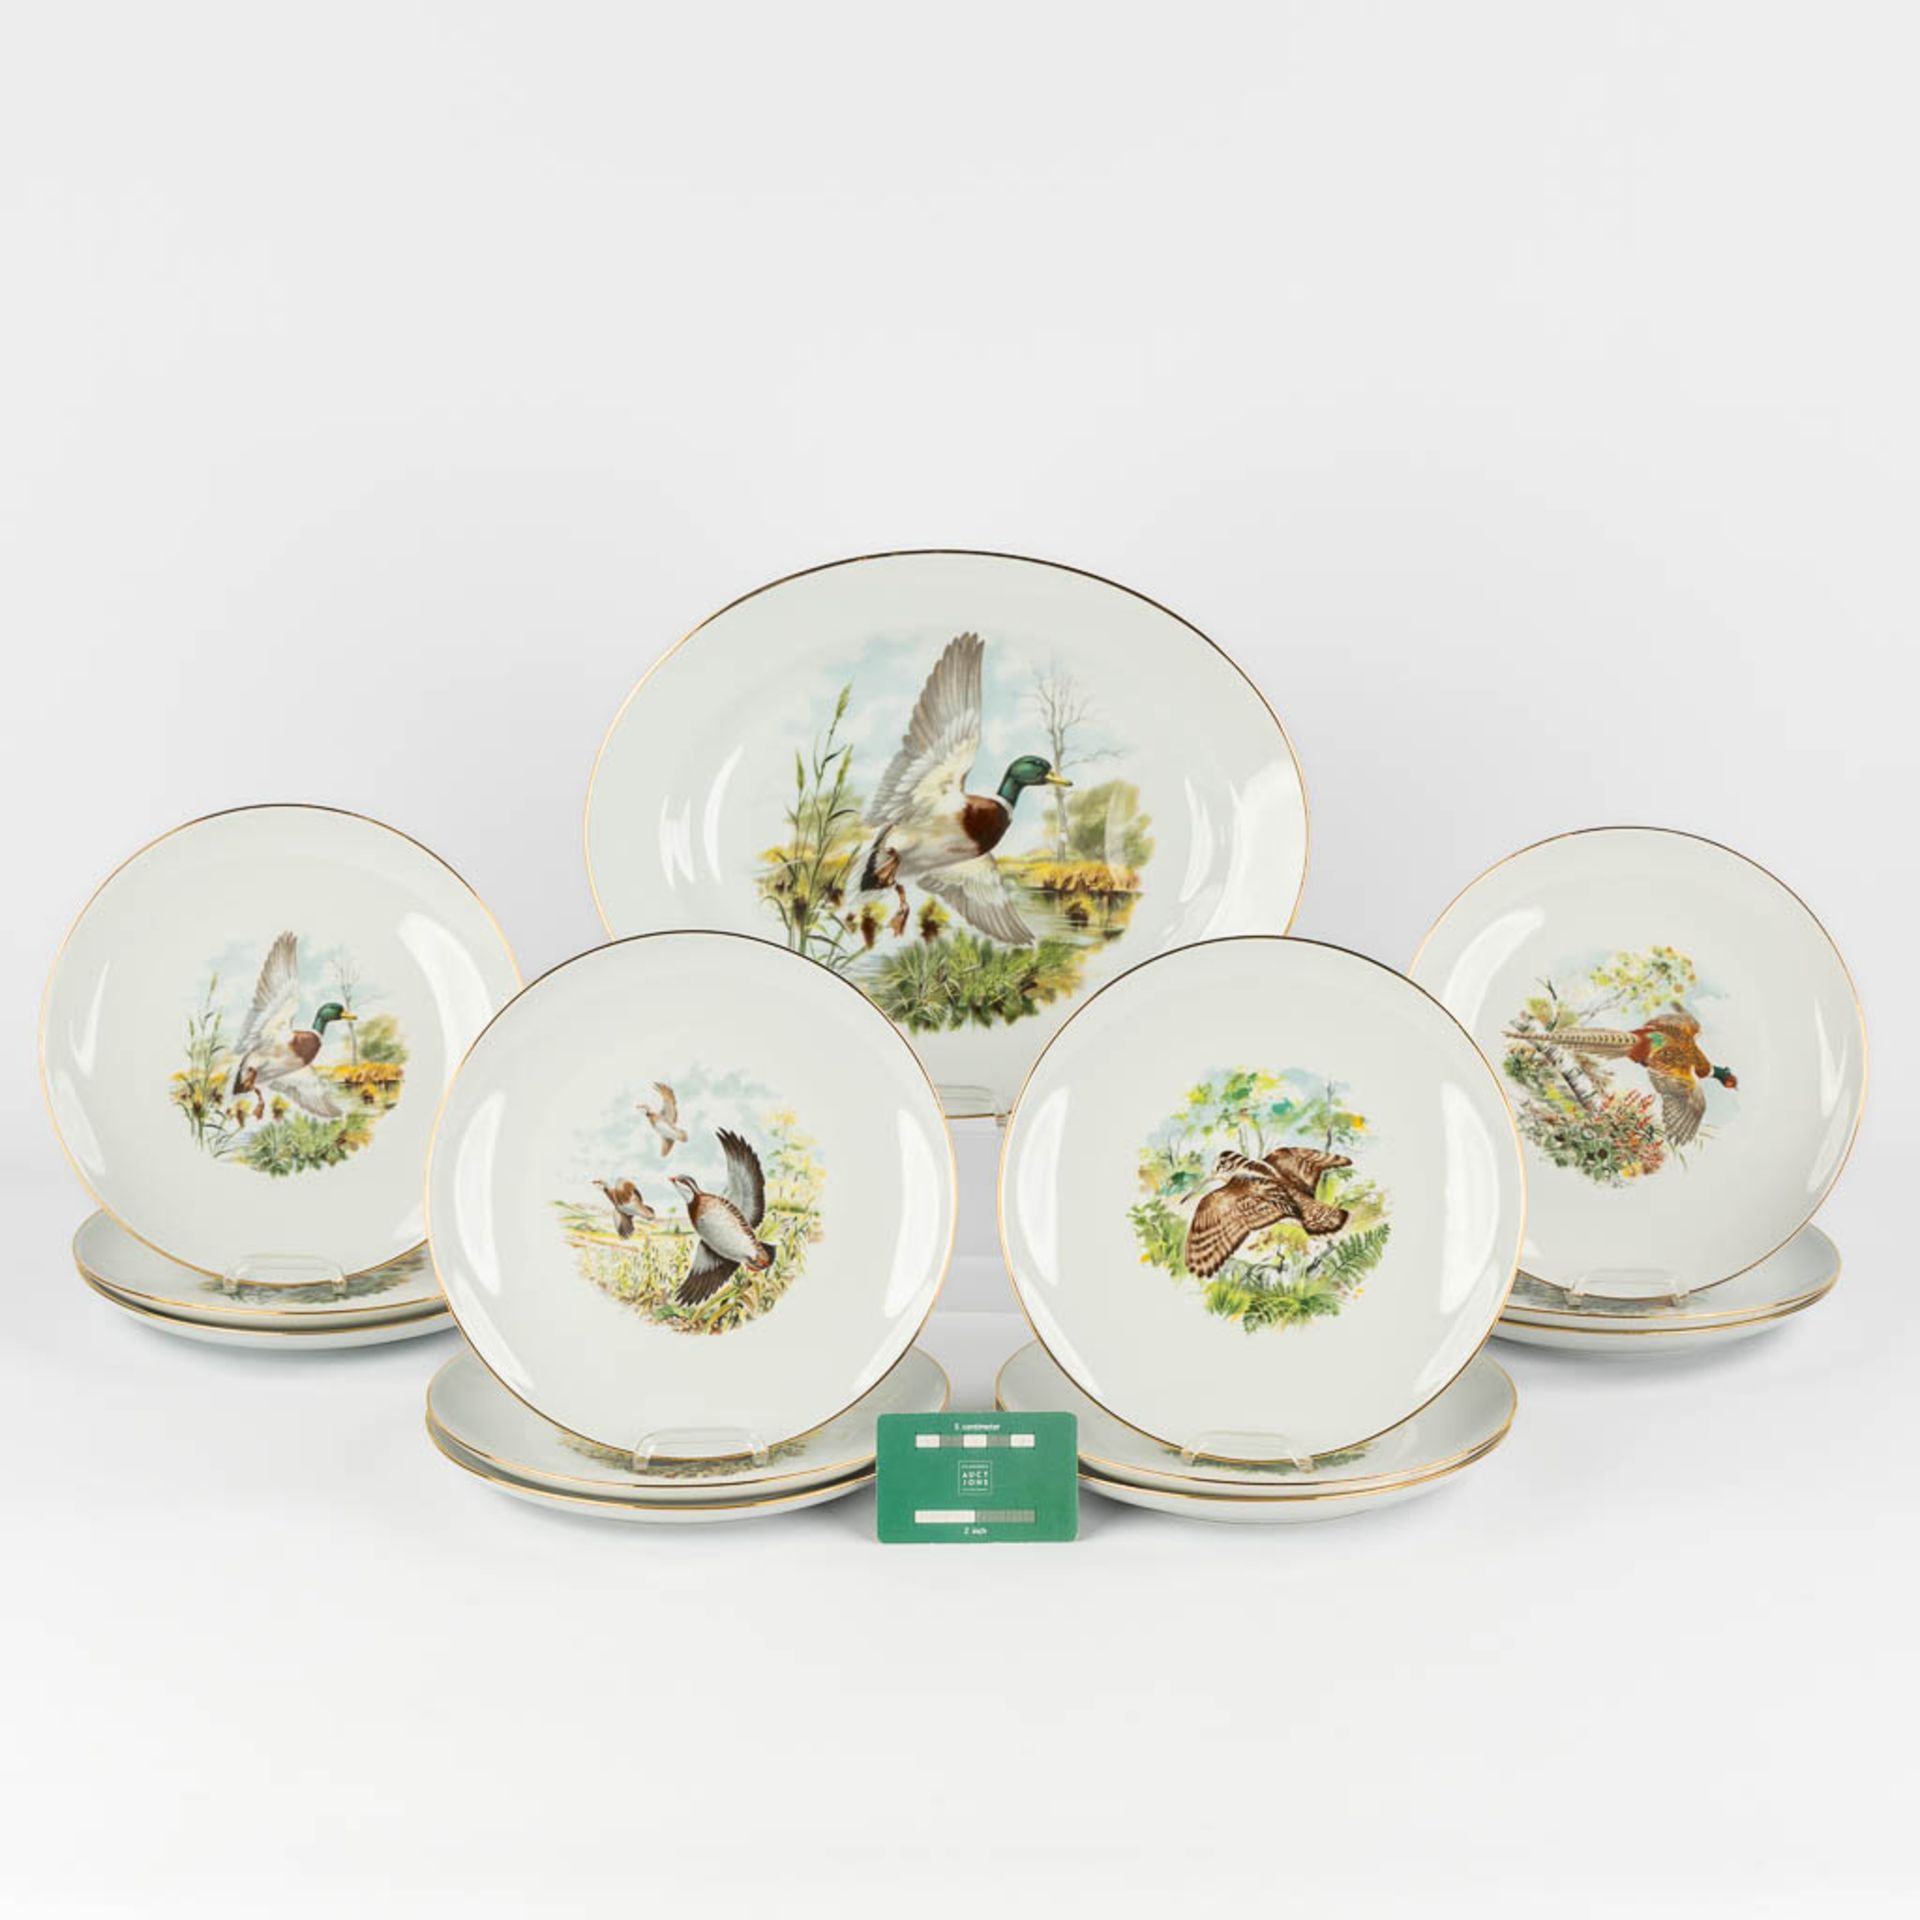 Limoges, France, a large, 12-person dinner, wild and coffee service. (L:23 x W:34 x H:22 cm) - Image 18 of 28